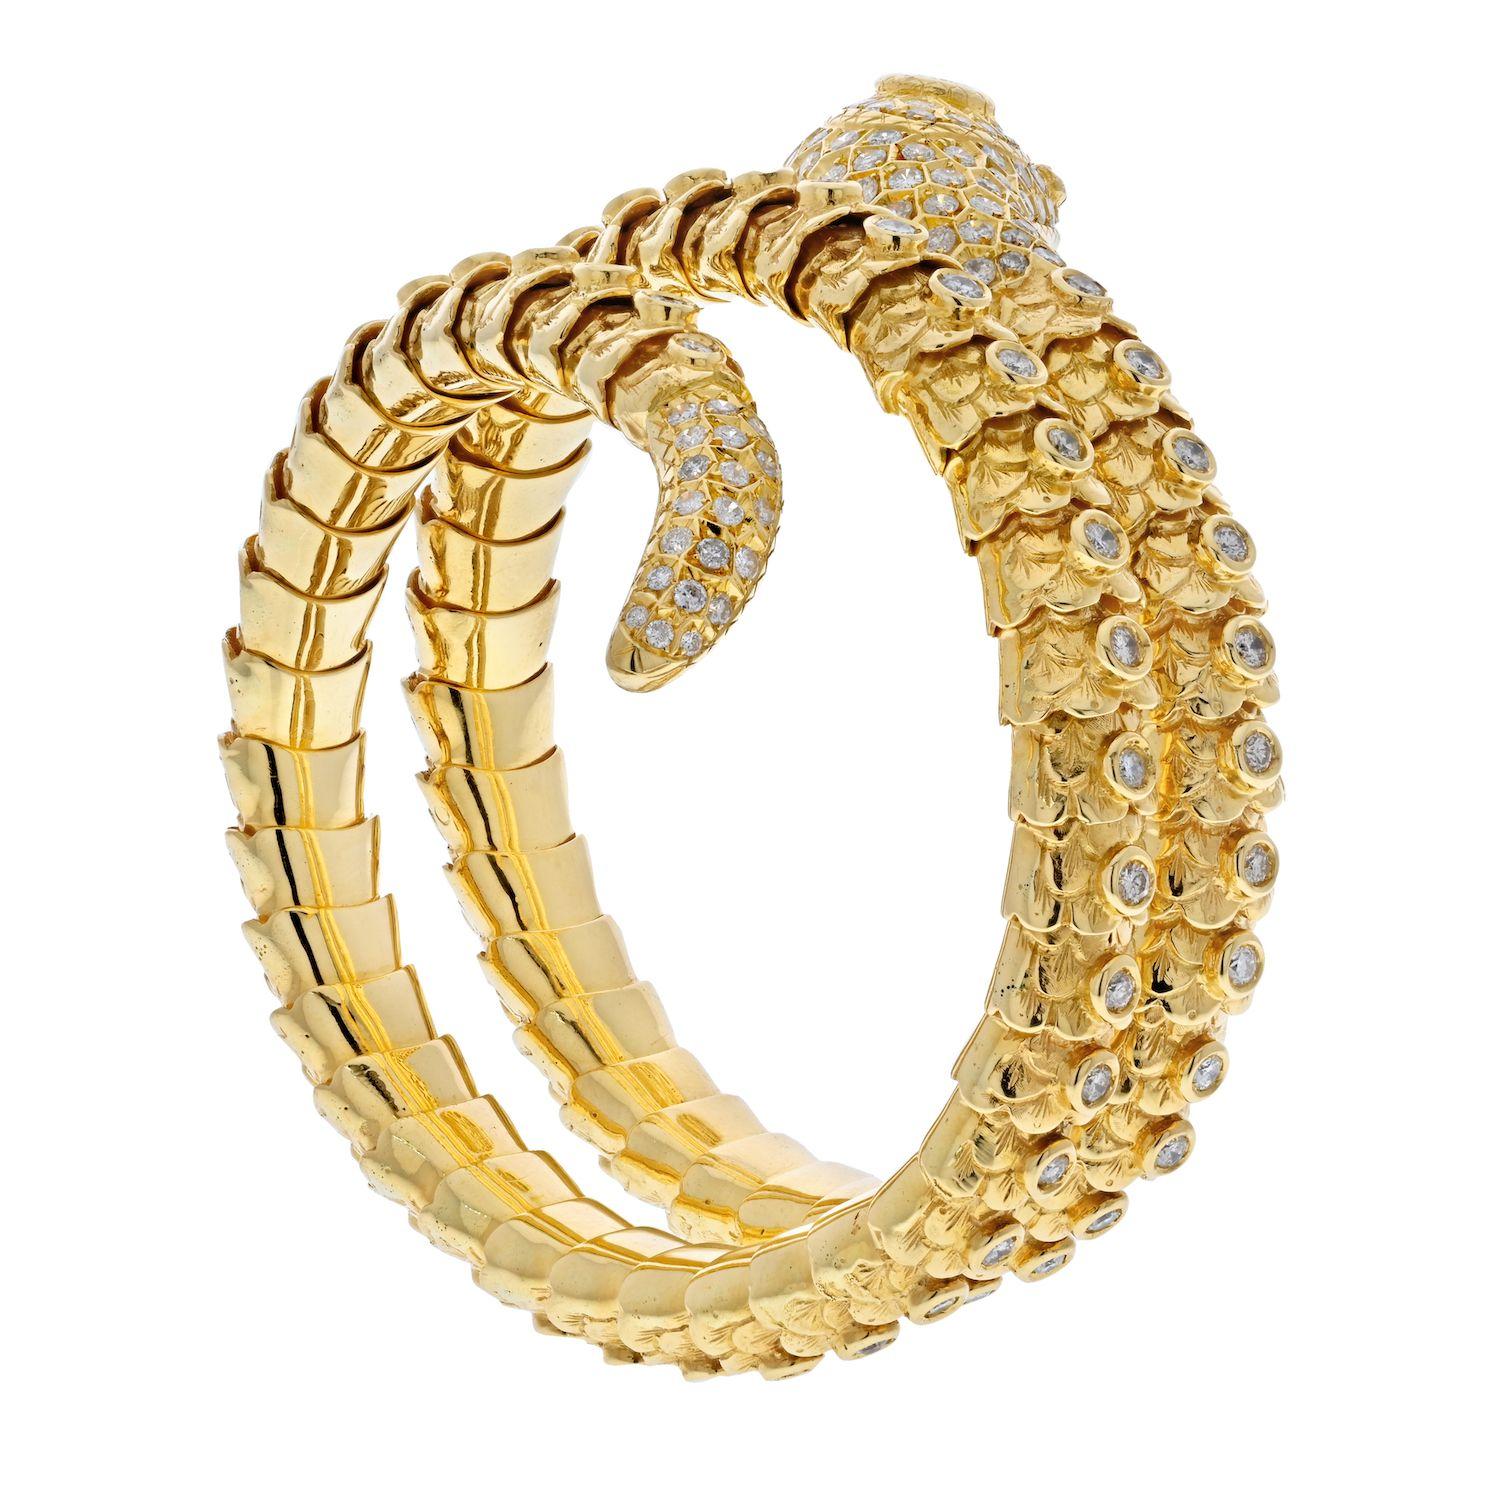 18K Yellow Gold Serpent Snake Wrap Around Diamond Bracelet.

This is a beautiful snake serpent wrap bracelet crafted in 18k yellow gold, This serpent has a cute personality with a little playful tongue sticking out of his mouth, green emerald eyes